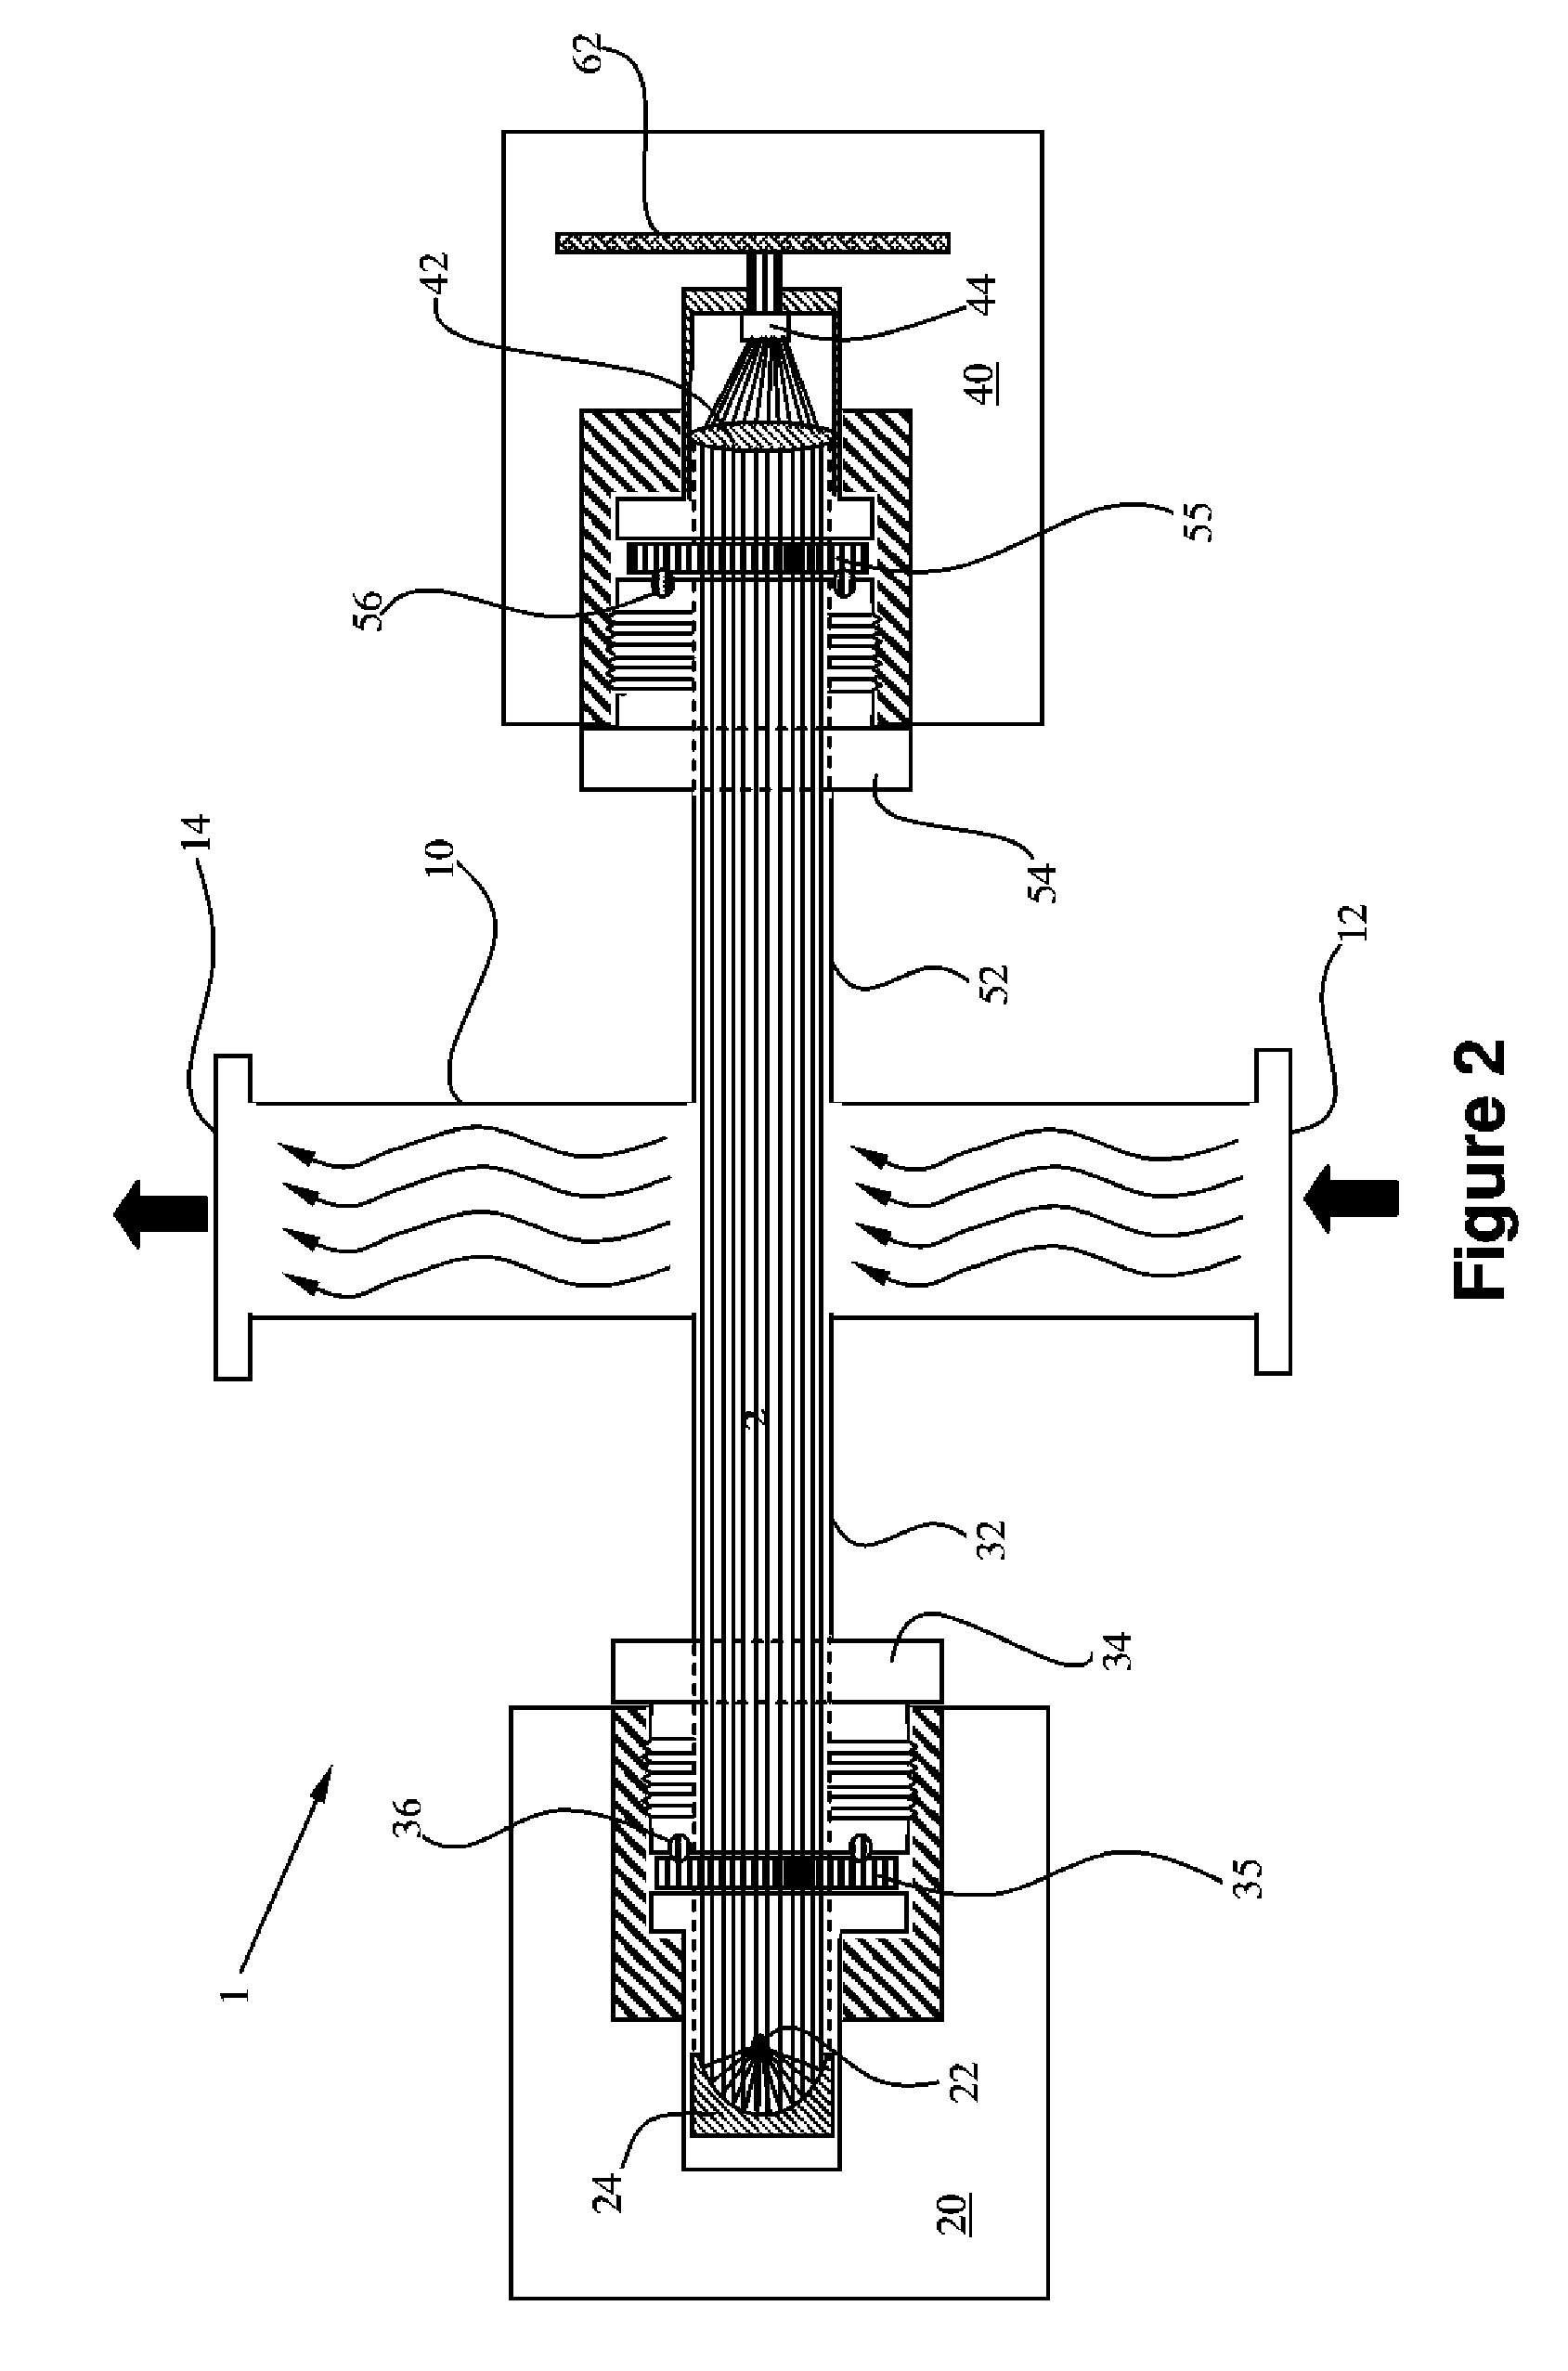 Monitoring system comprising infrared thermopile detector